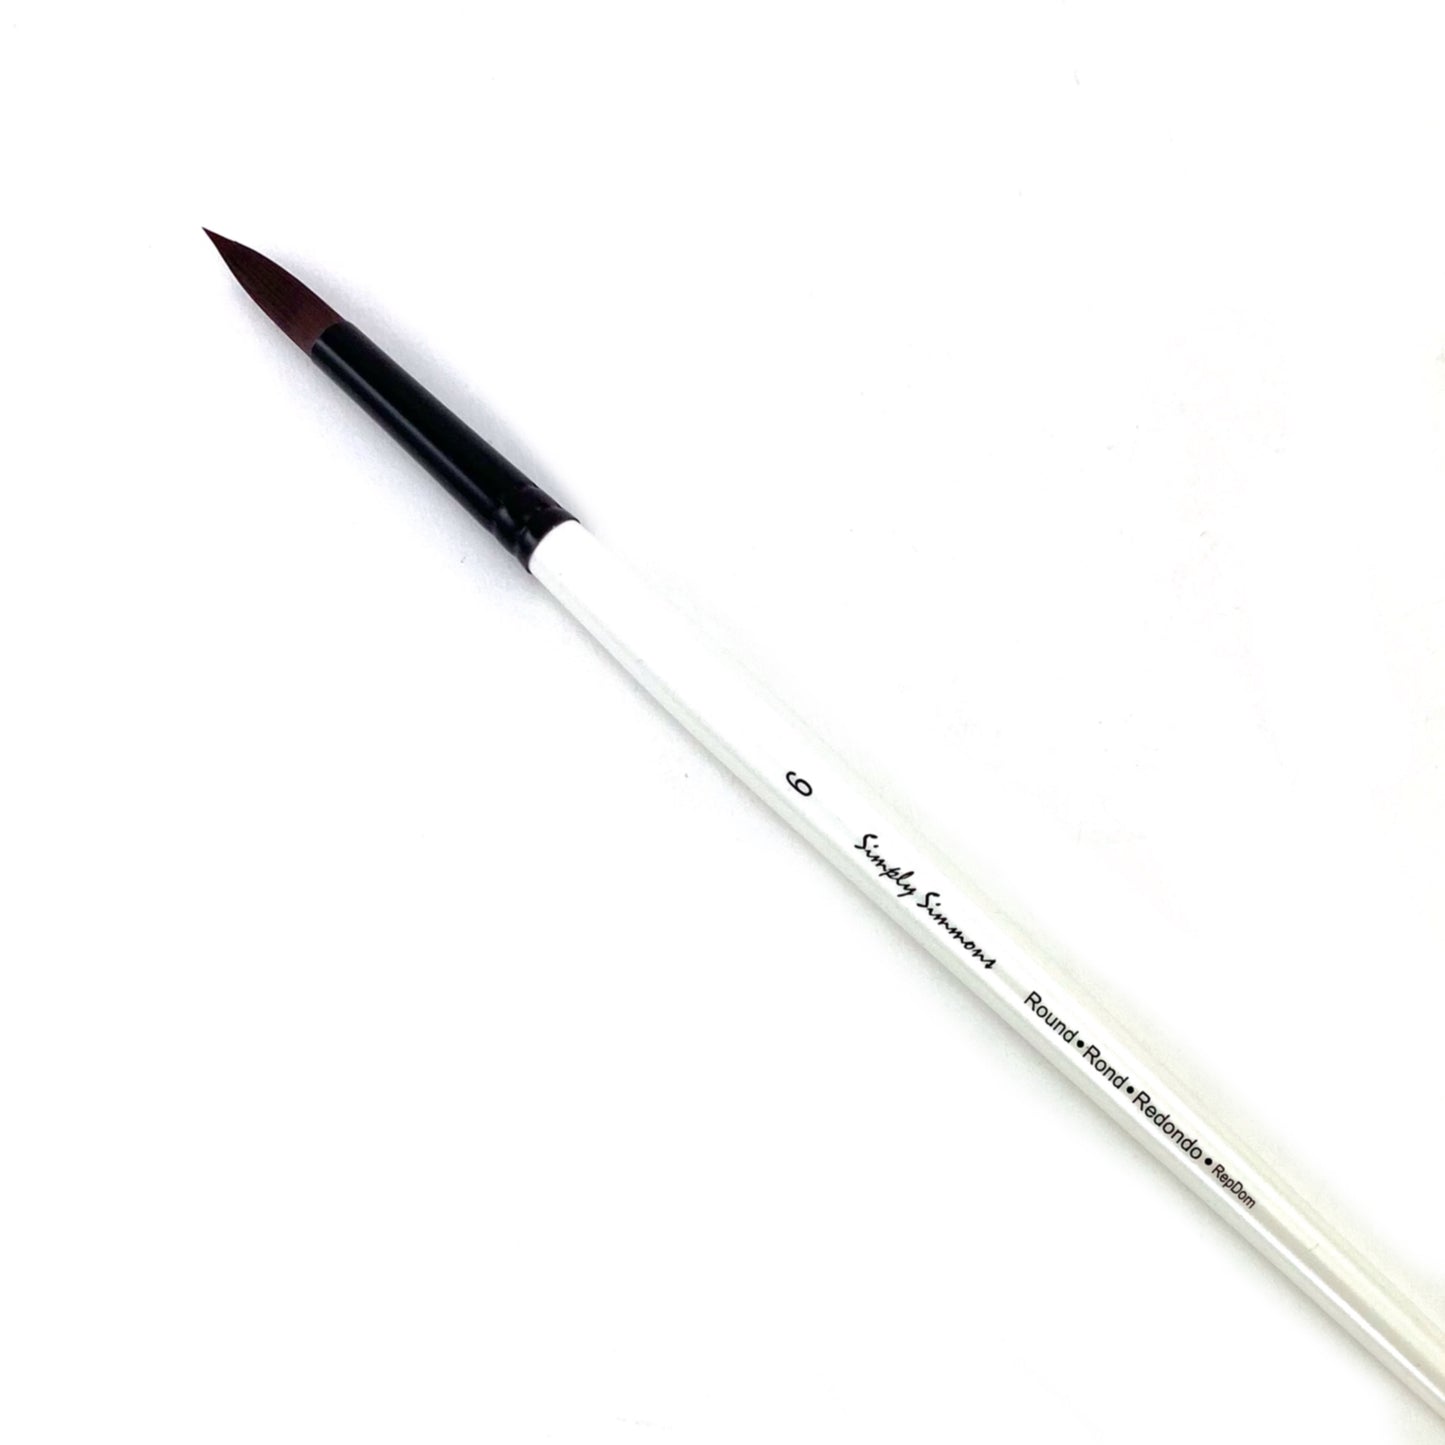 Simply Simmons All-Media Brush - Long Handle - Round (Extra-Firm Synthetic) / #6 by Robert Simmons - K. A. Artist Shop